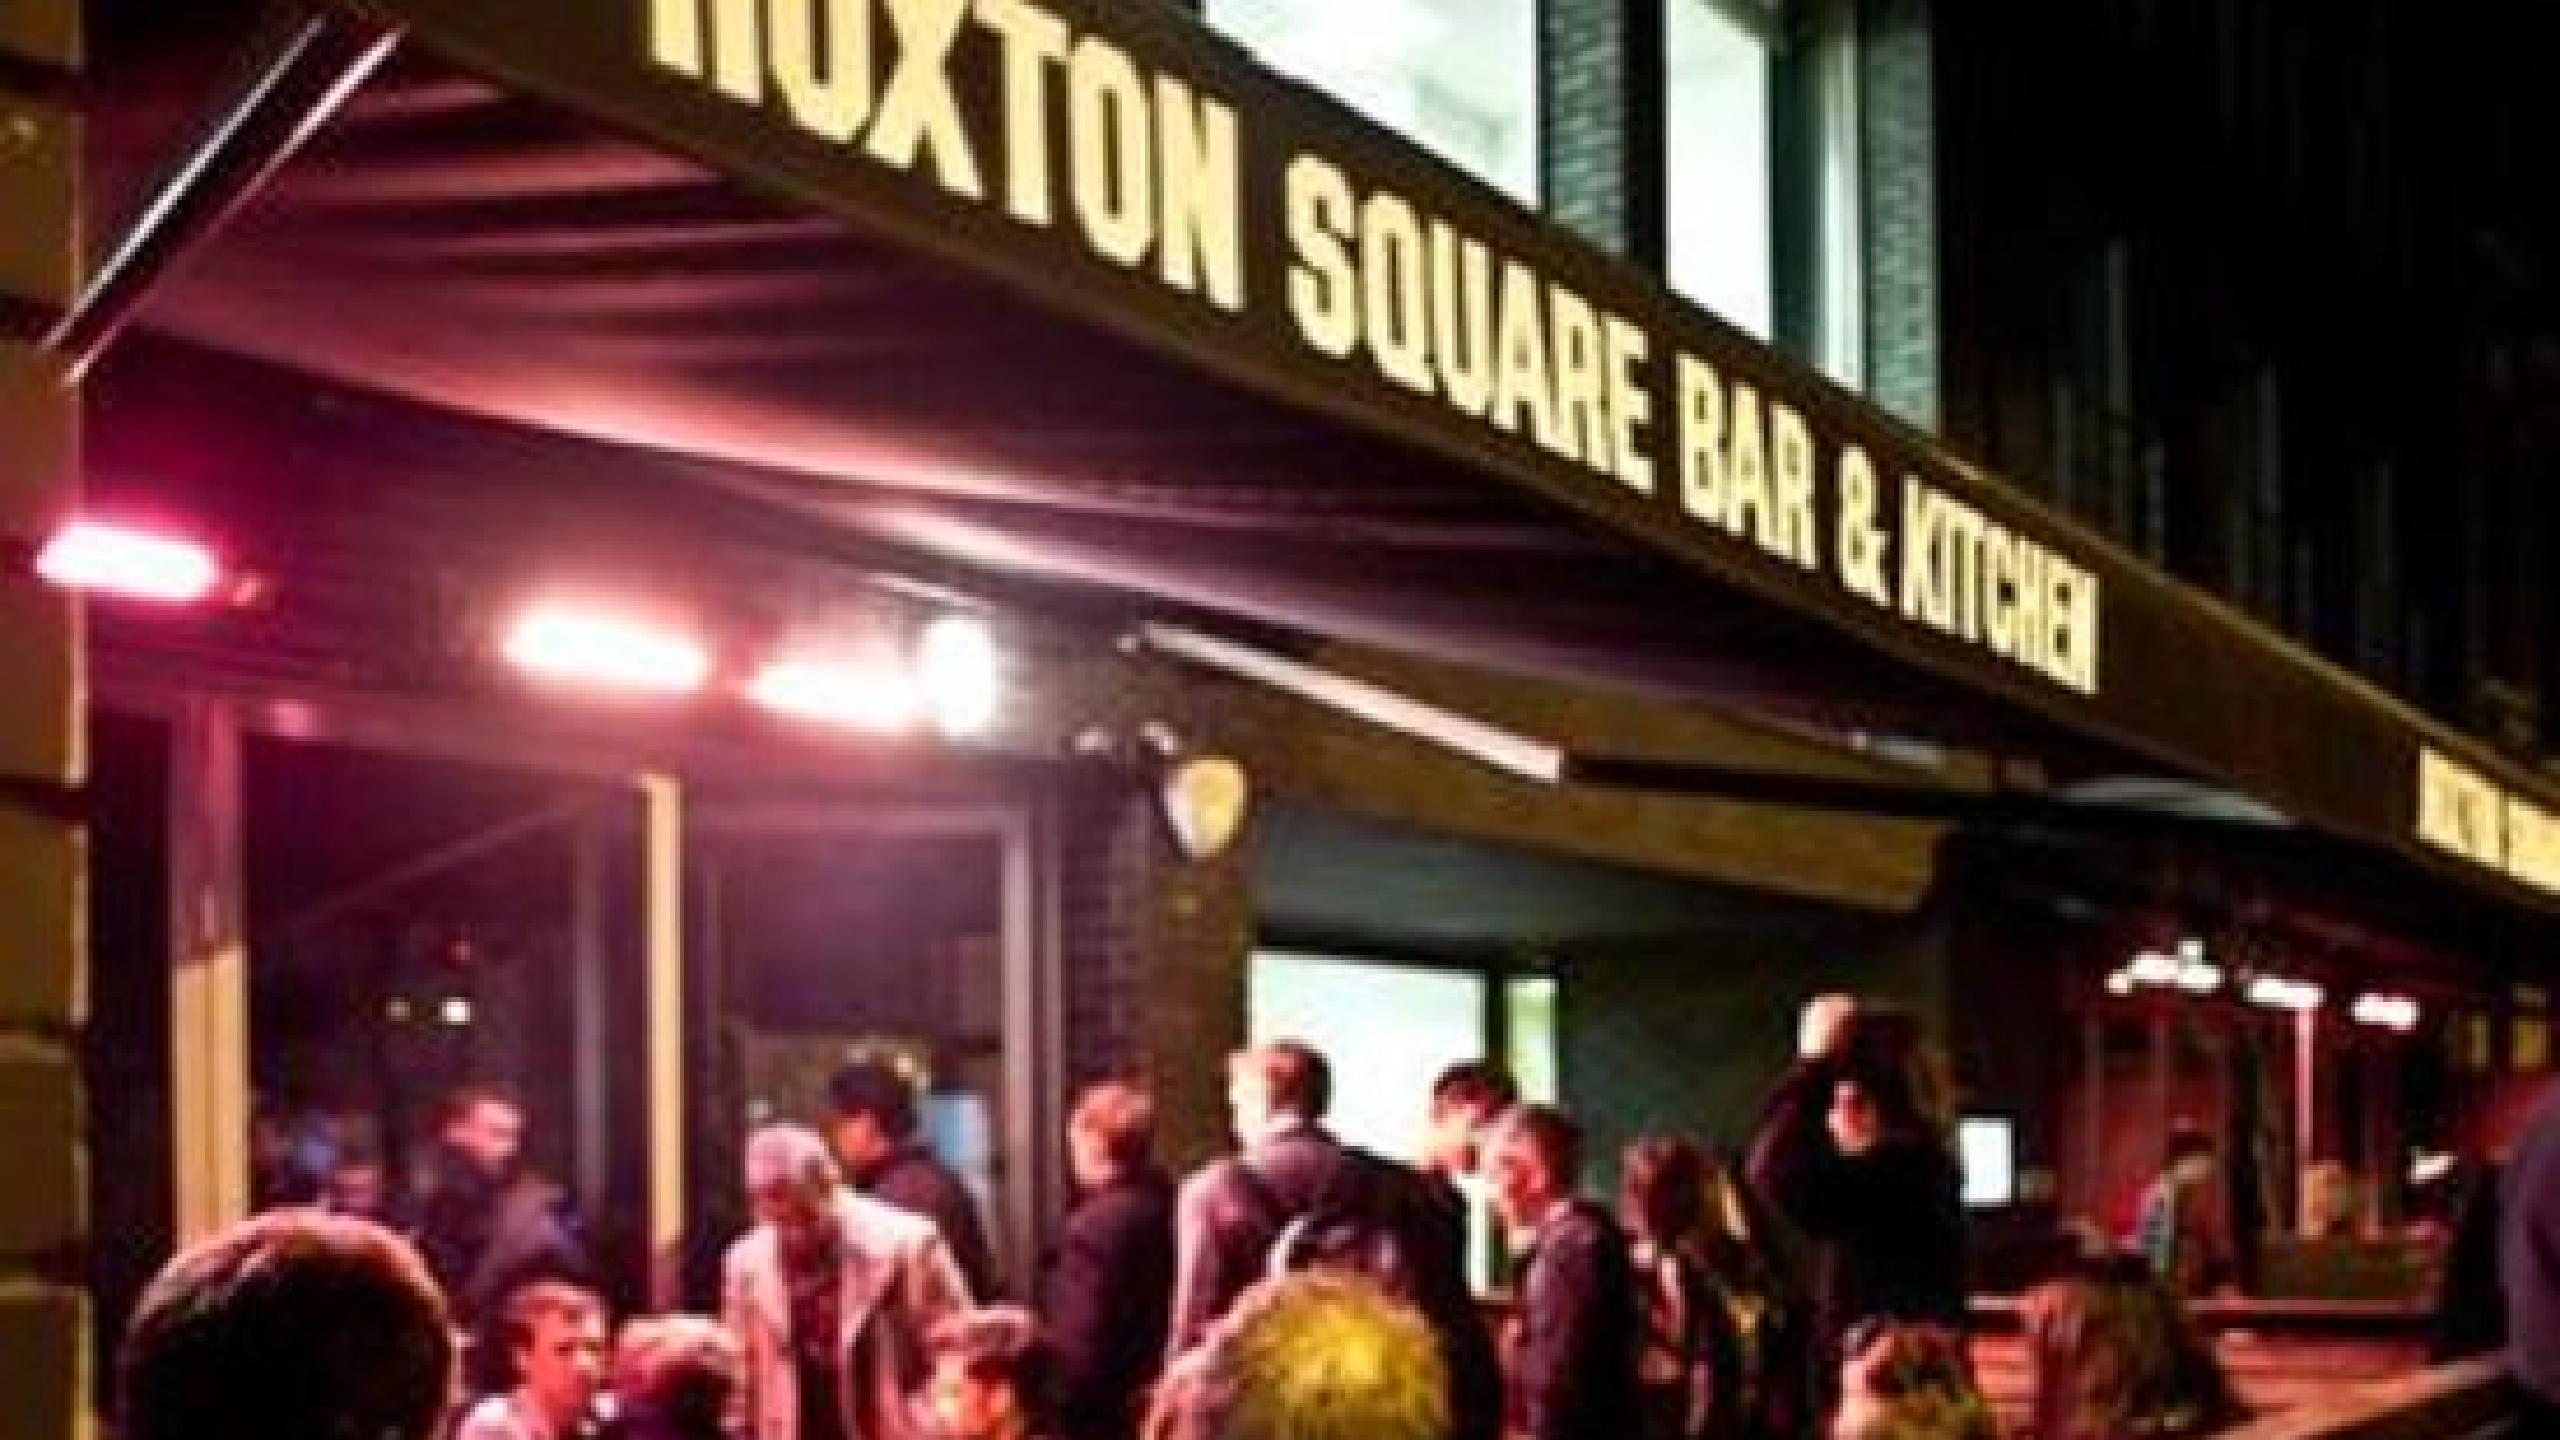 hoxton square bar and kitchen london n1 6nu